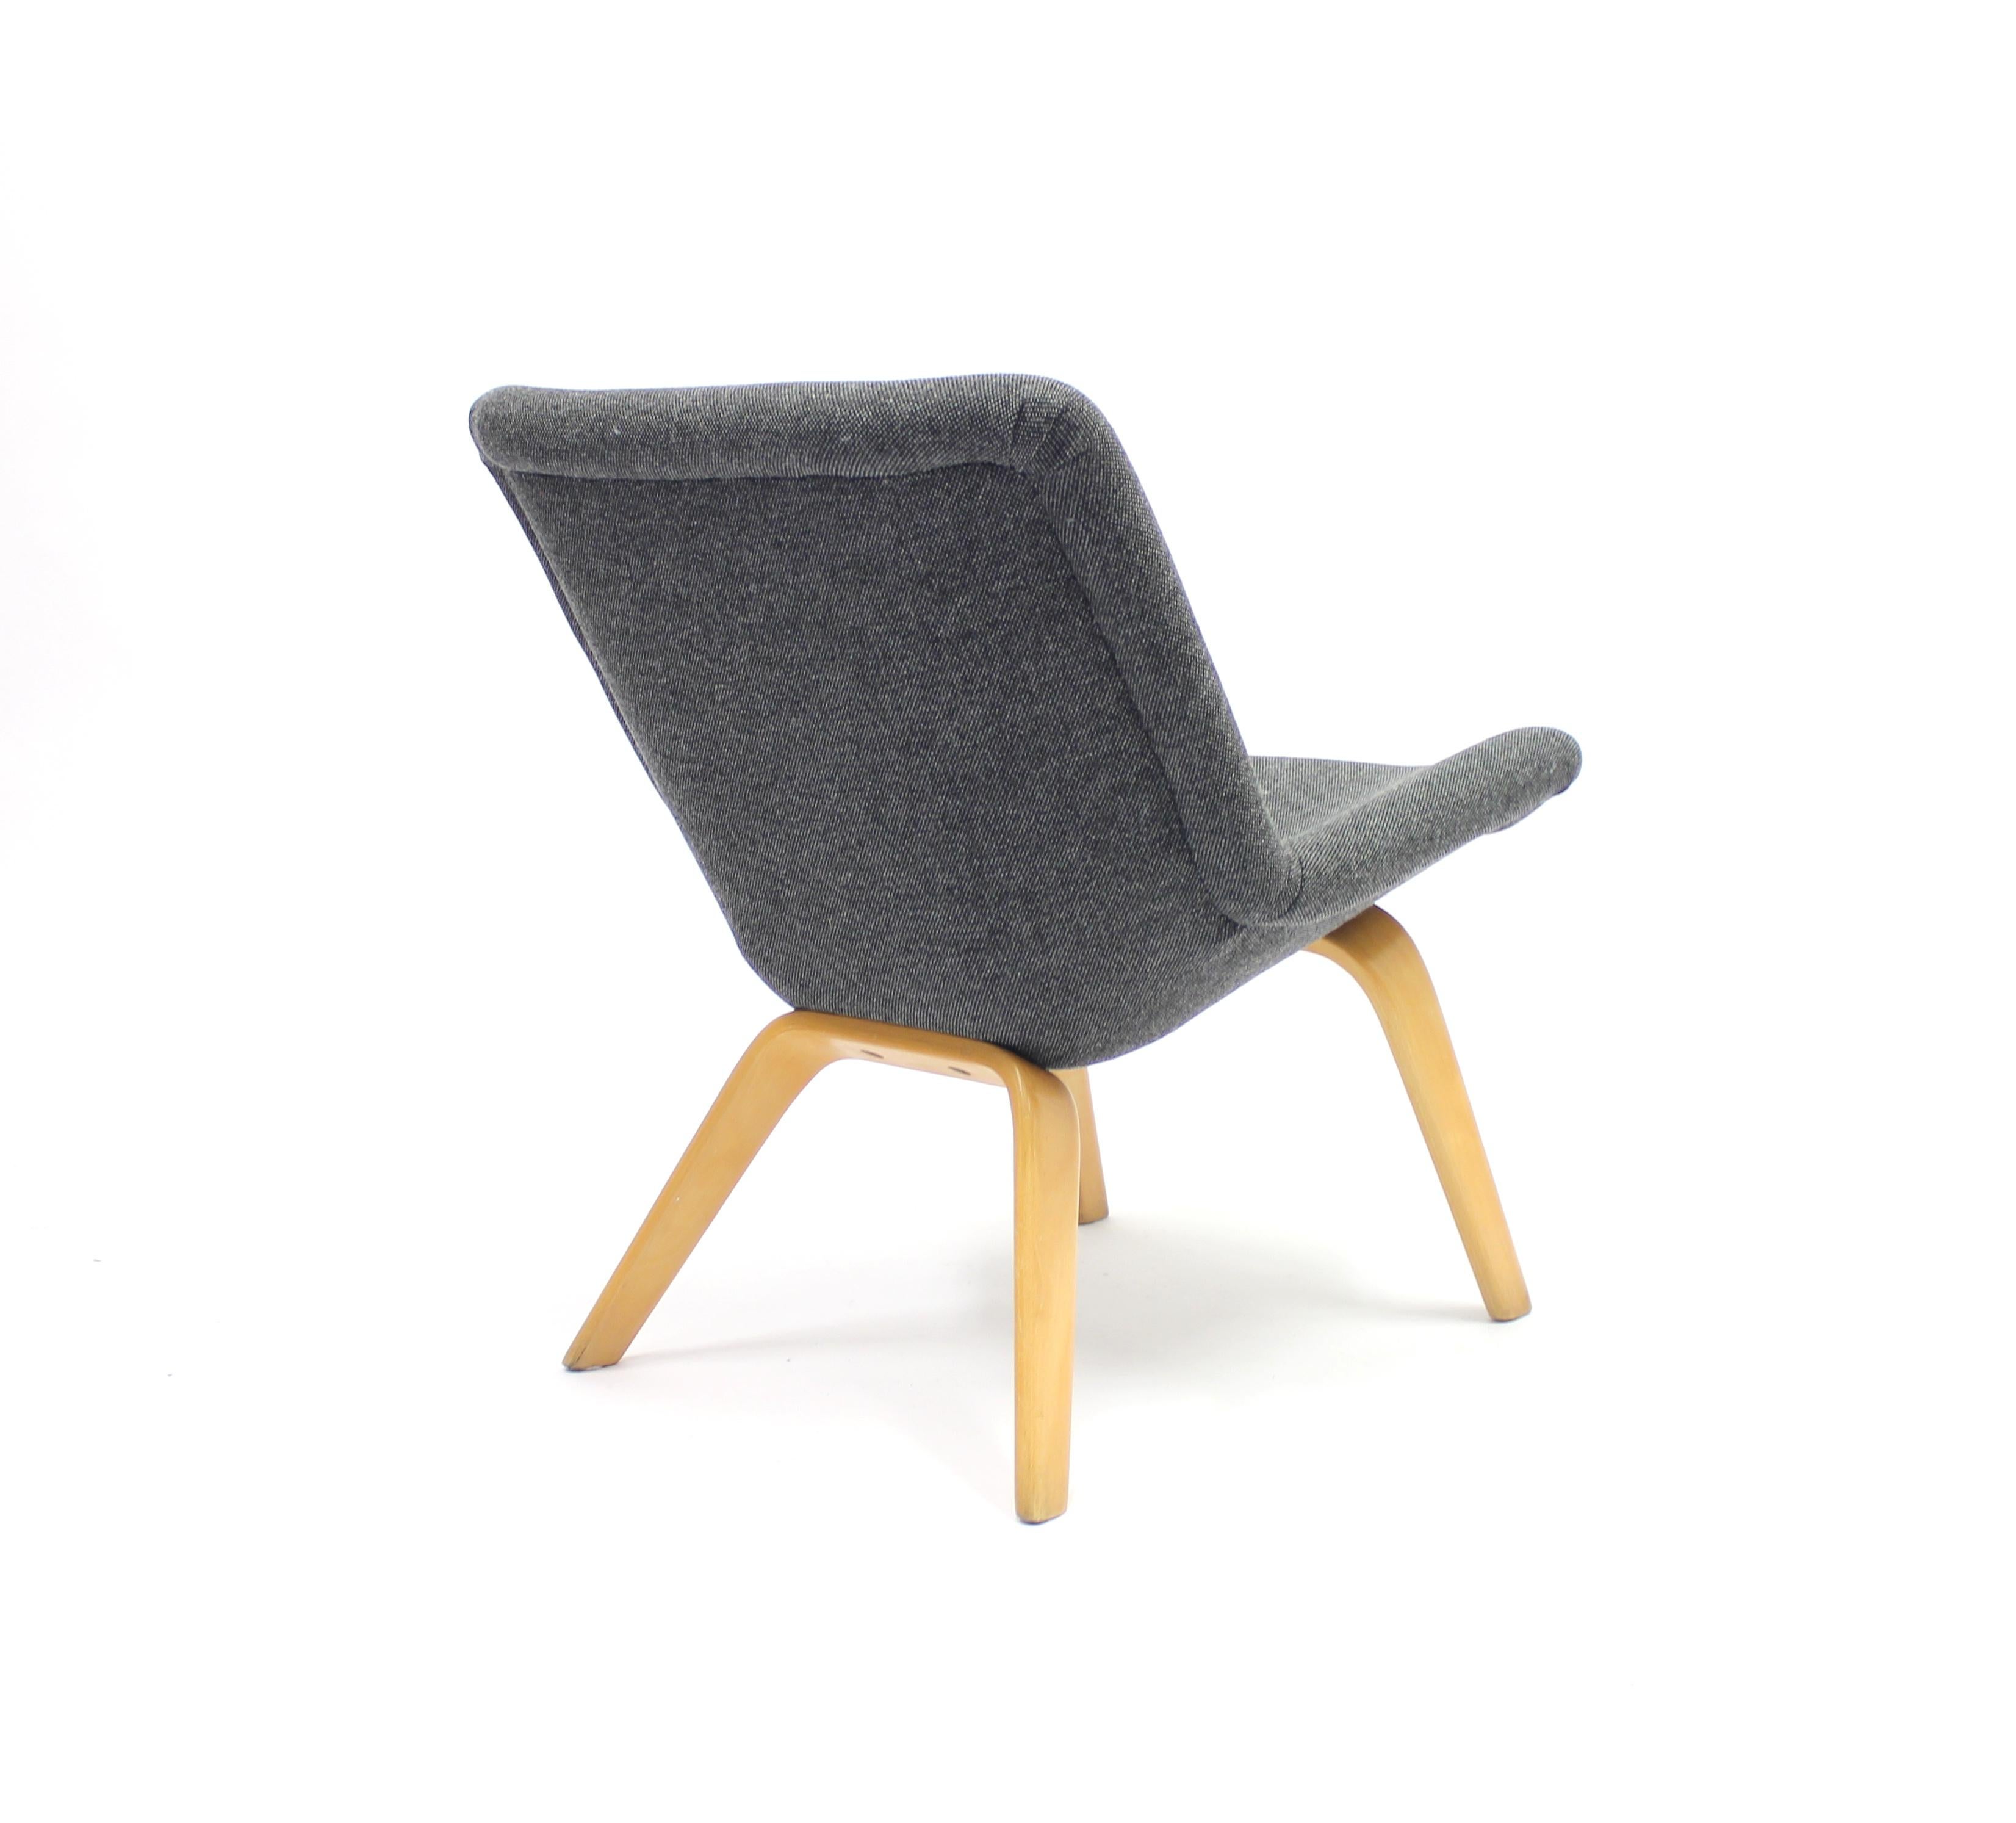 Fabric Easy Chair by Carl Gustaf Hiort af Ornäs for Gösta Westerberg, 1950s For Sale